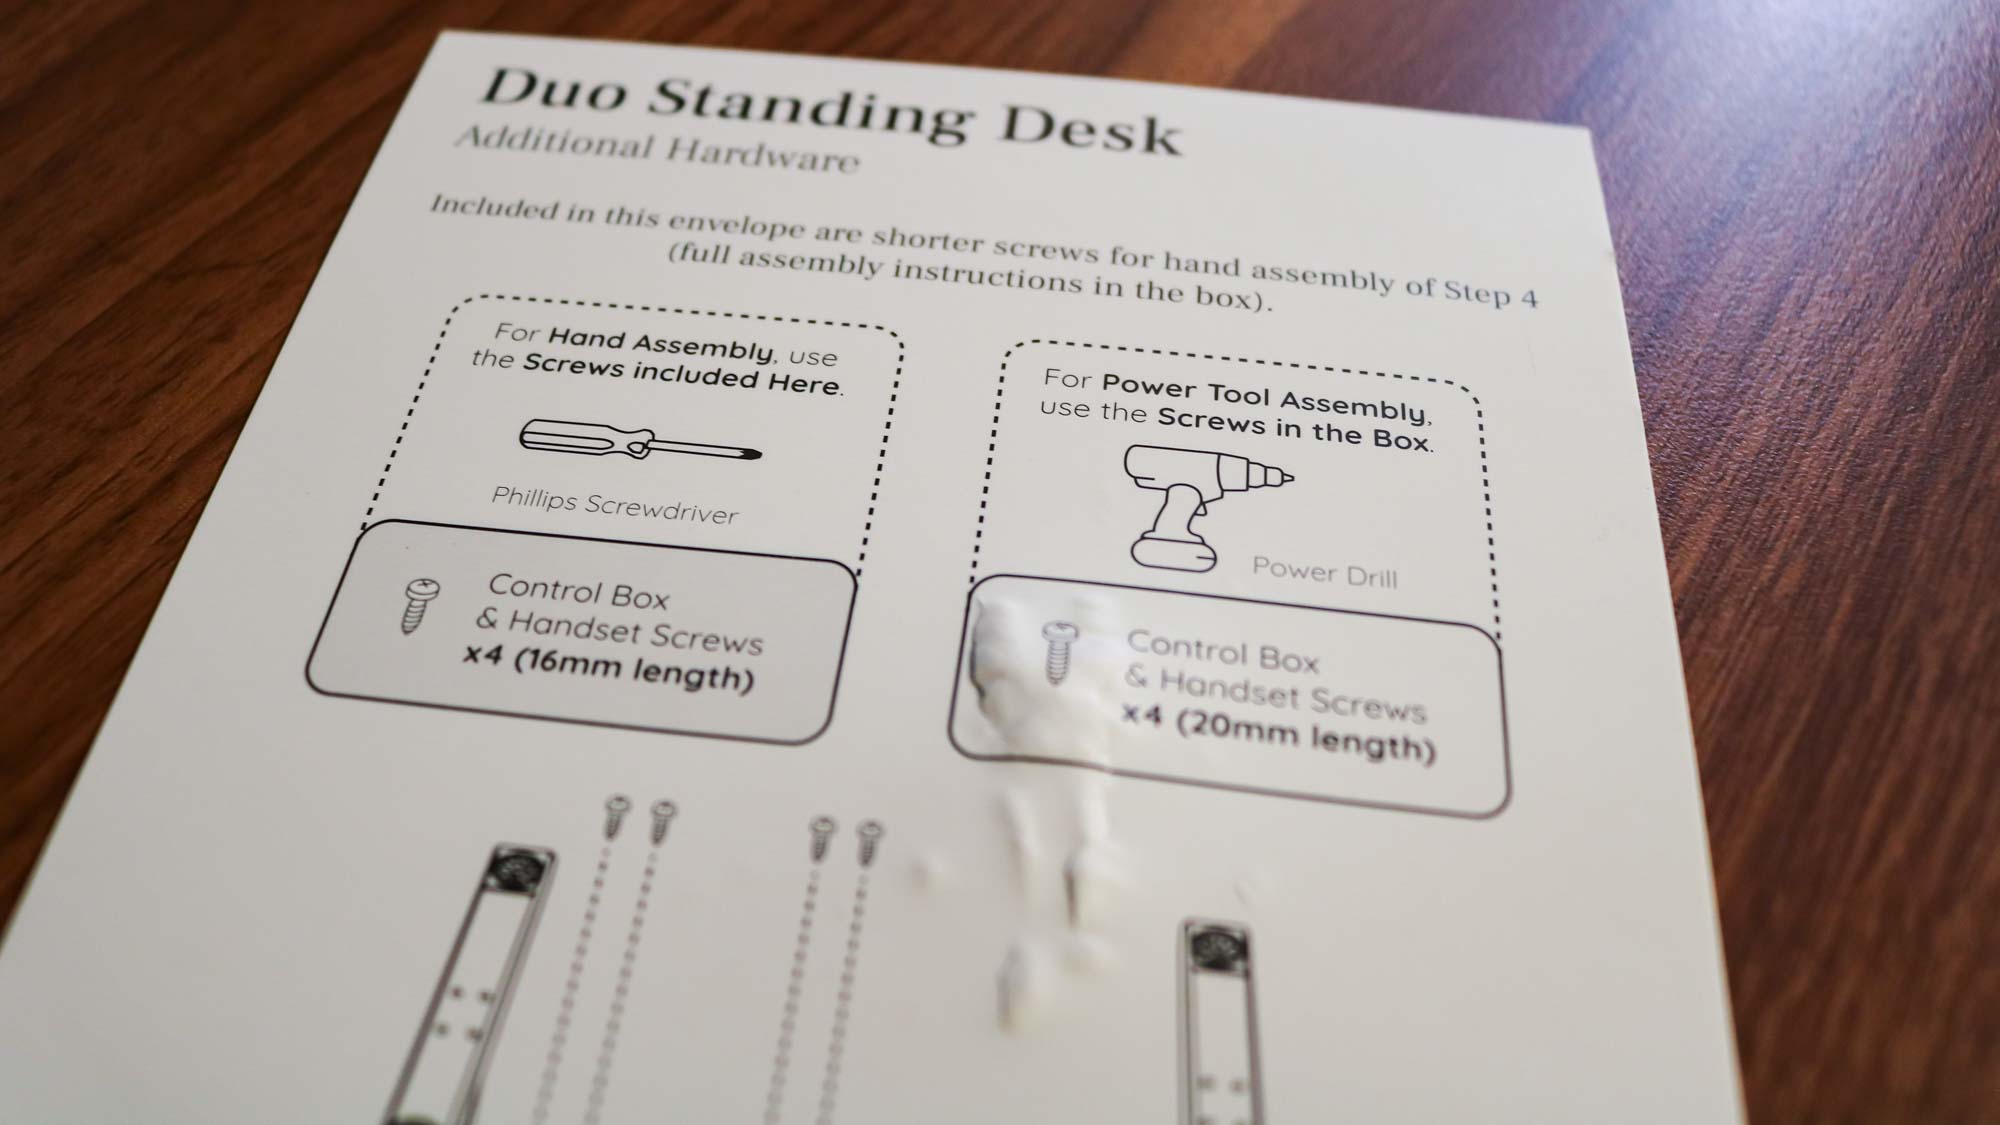 A picture of a flyer explaining how to use the optional screws that ship with the Branch Duo Standing Desk